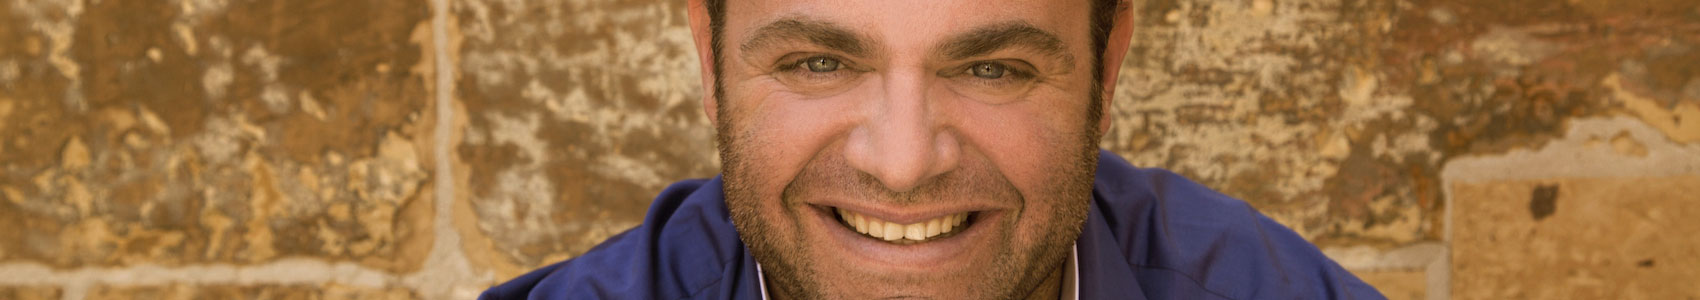 One of the world’s most thrilling tenors, Joseph Calleja, is making his eagerly anticipated debut in New Zealand next month for one night only with his tour titled - ‘The Maltese Tenor’ 